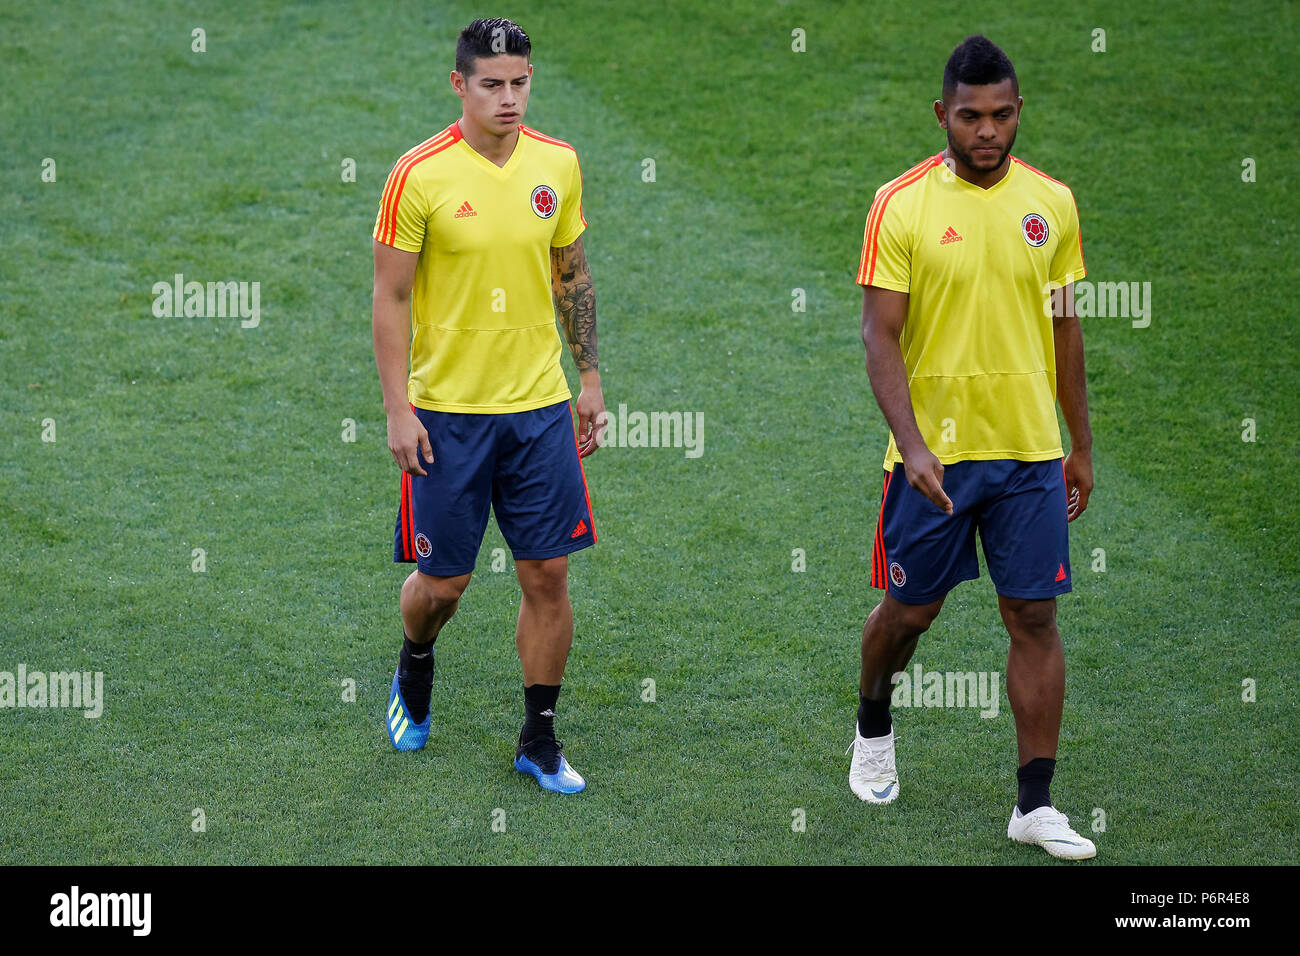 Moscow, Russia. 2nd July 2018. James Rodriguez of Colombia (left) during a Colombia training session, prior to their 2018 FIFA World Cup Round of 16 match against England, at Spartak Stadium on July 2nd 2018 in Moscow, Russia. Credit: PHC Images/Alamy Live News Stock Photo